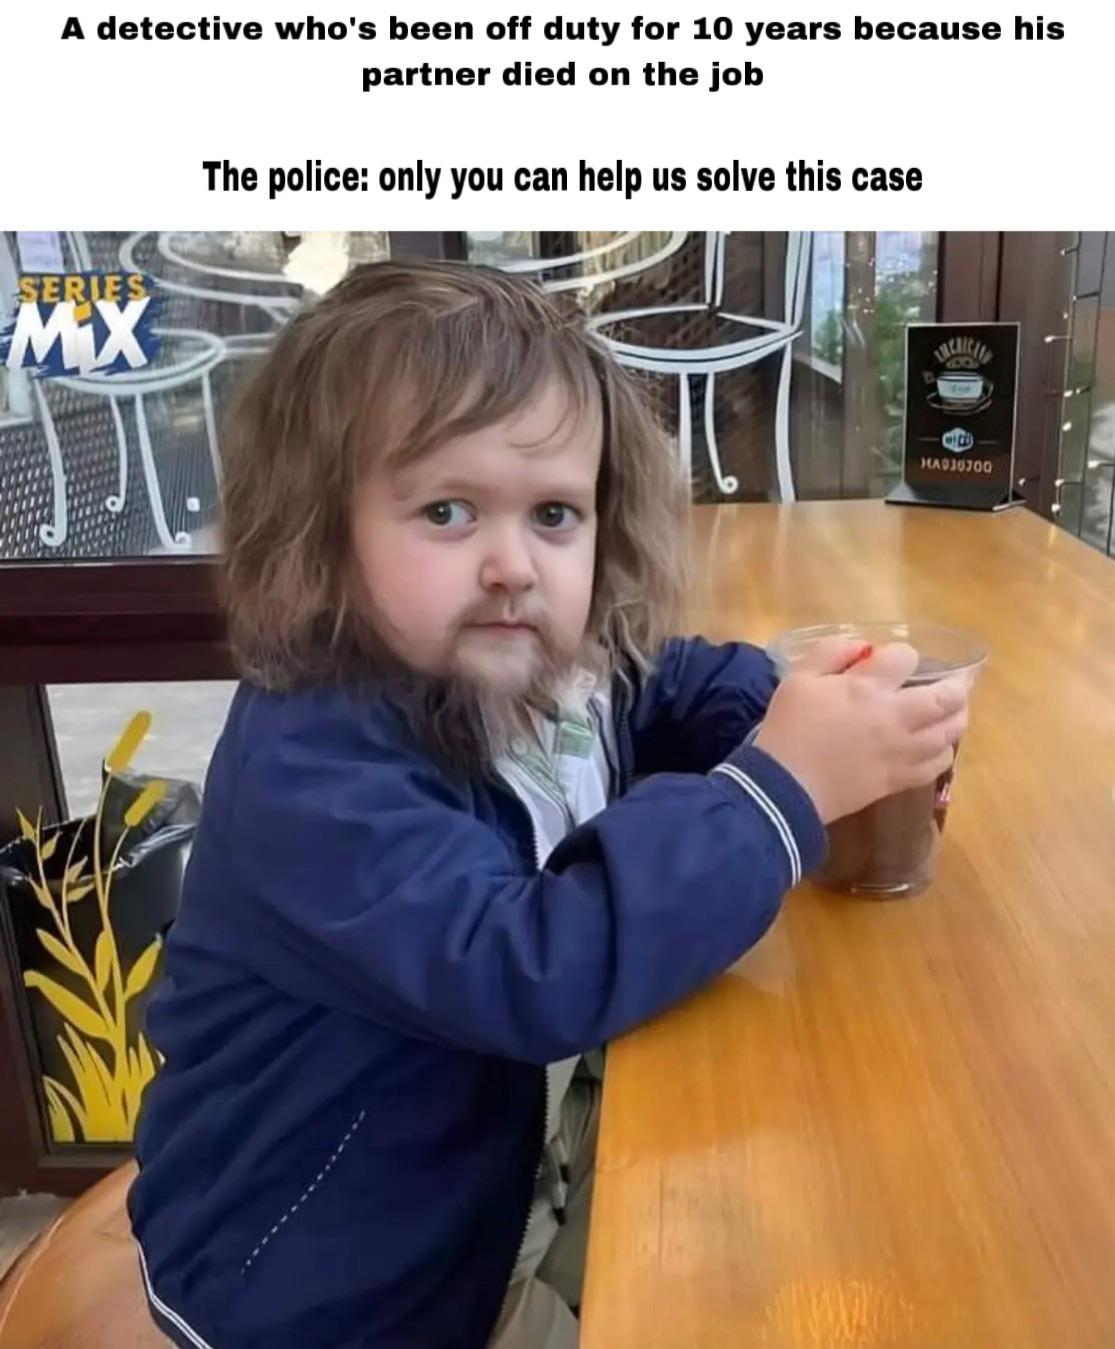 dank memes and pics - hasbulla magomedov - A detective who's been off duty for 10 years because his partner died on the job The police only you can help us solve this case Series Mx Encic HAD30300